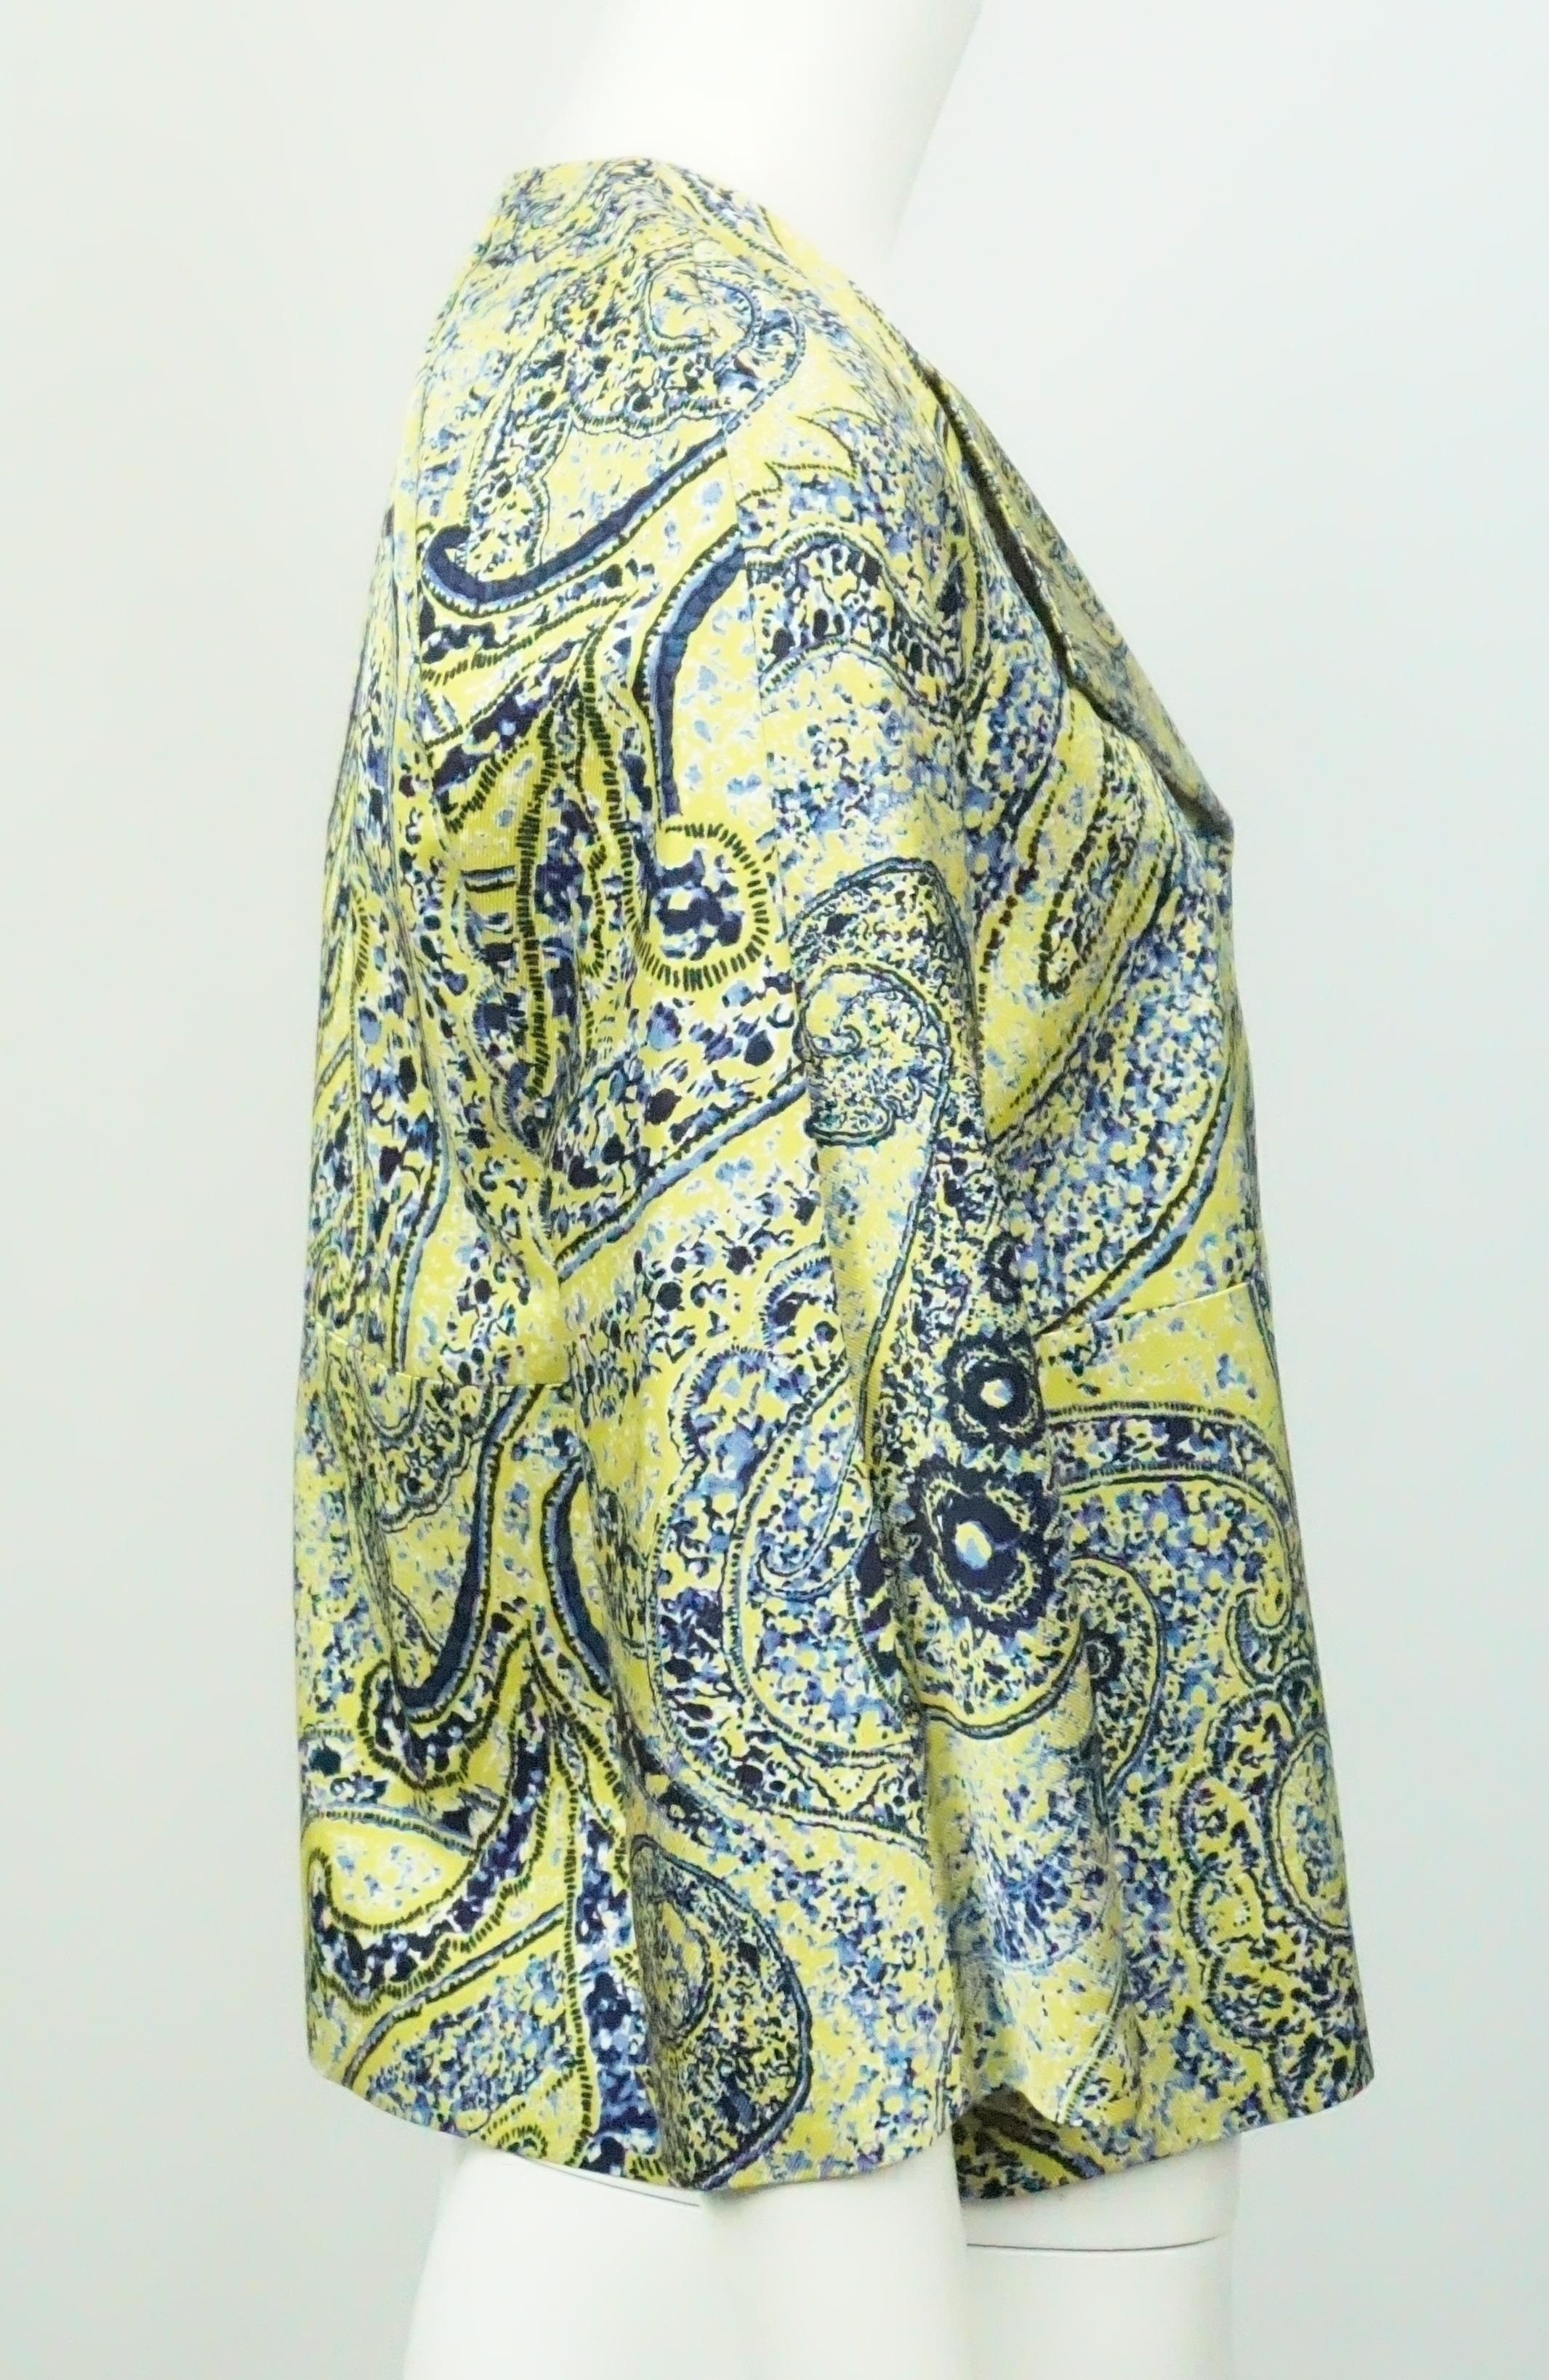 Etro Lime Green and Blue Silk Print Jacket - 38 This perfect summer jacket has a vibrant yet fresh silk print, is fully lined, has 2 interior large snaps, and 3/4 sleeves. The jacket is in excellent condition.
Measurements are as follows:
Bust 